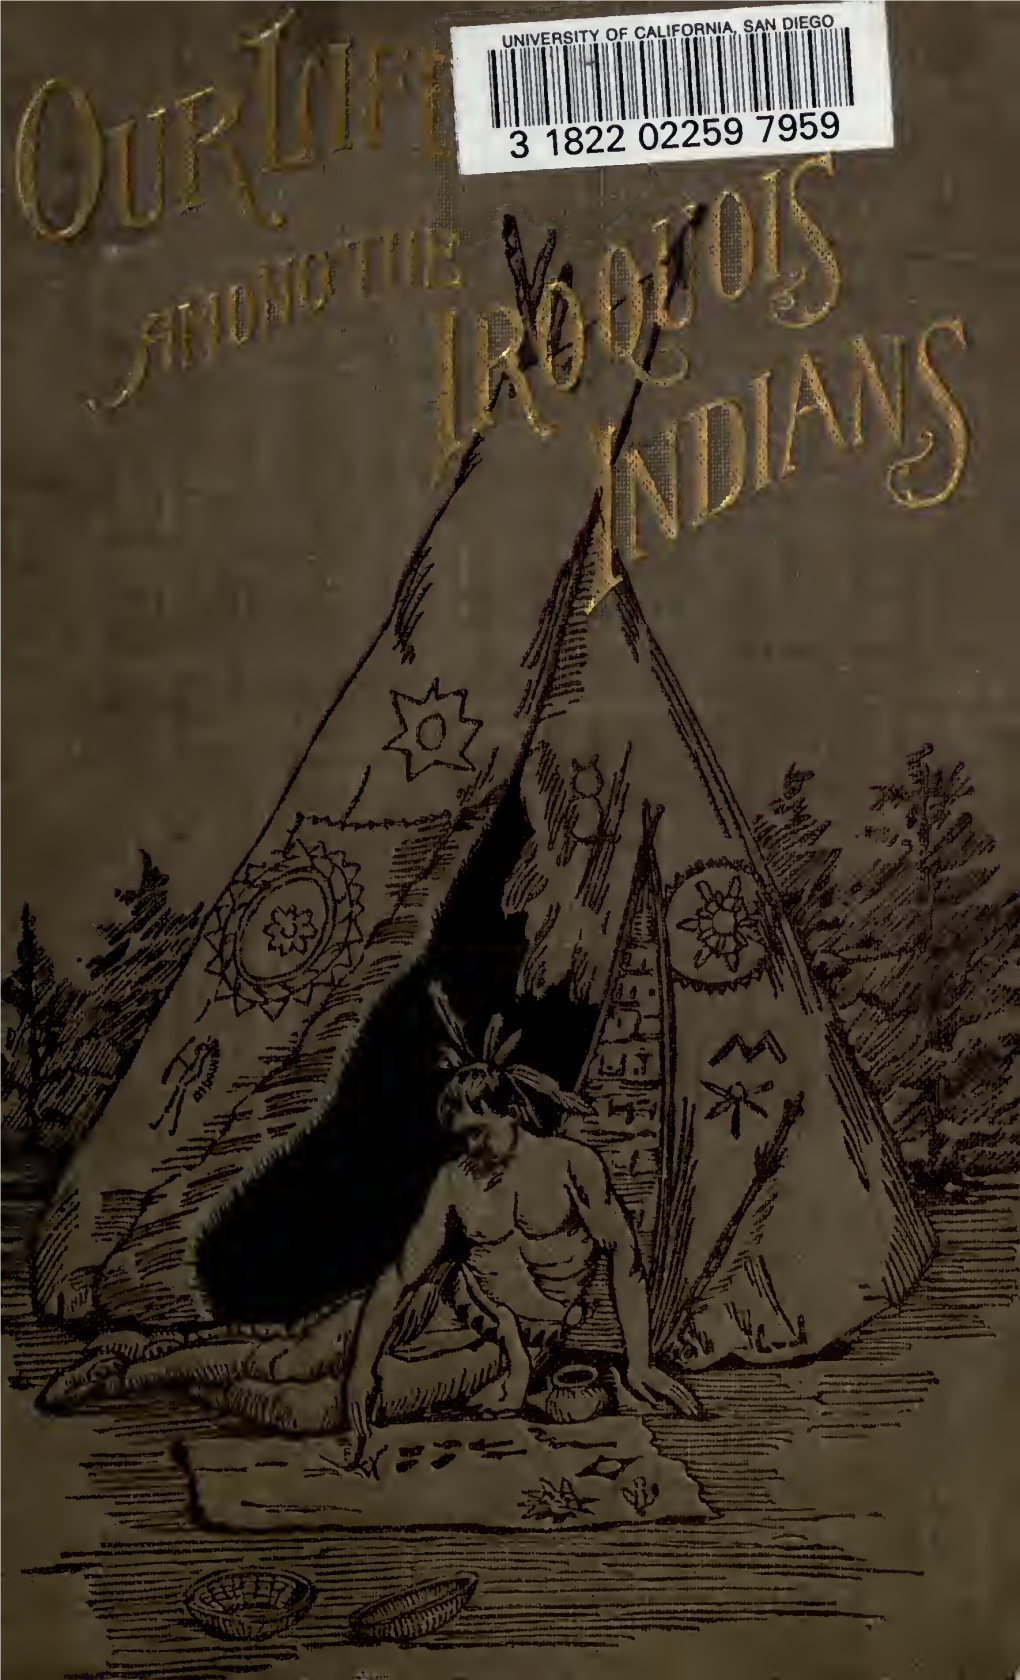 Our Life Among the Iroquois Indians, by Harriet S. Caswell